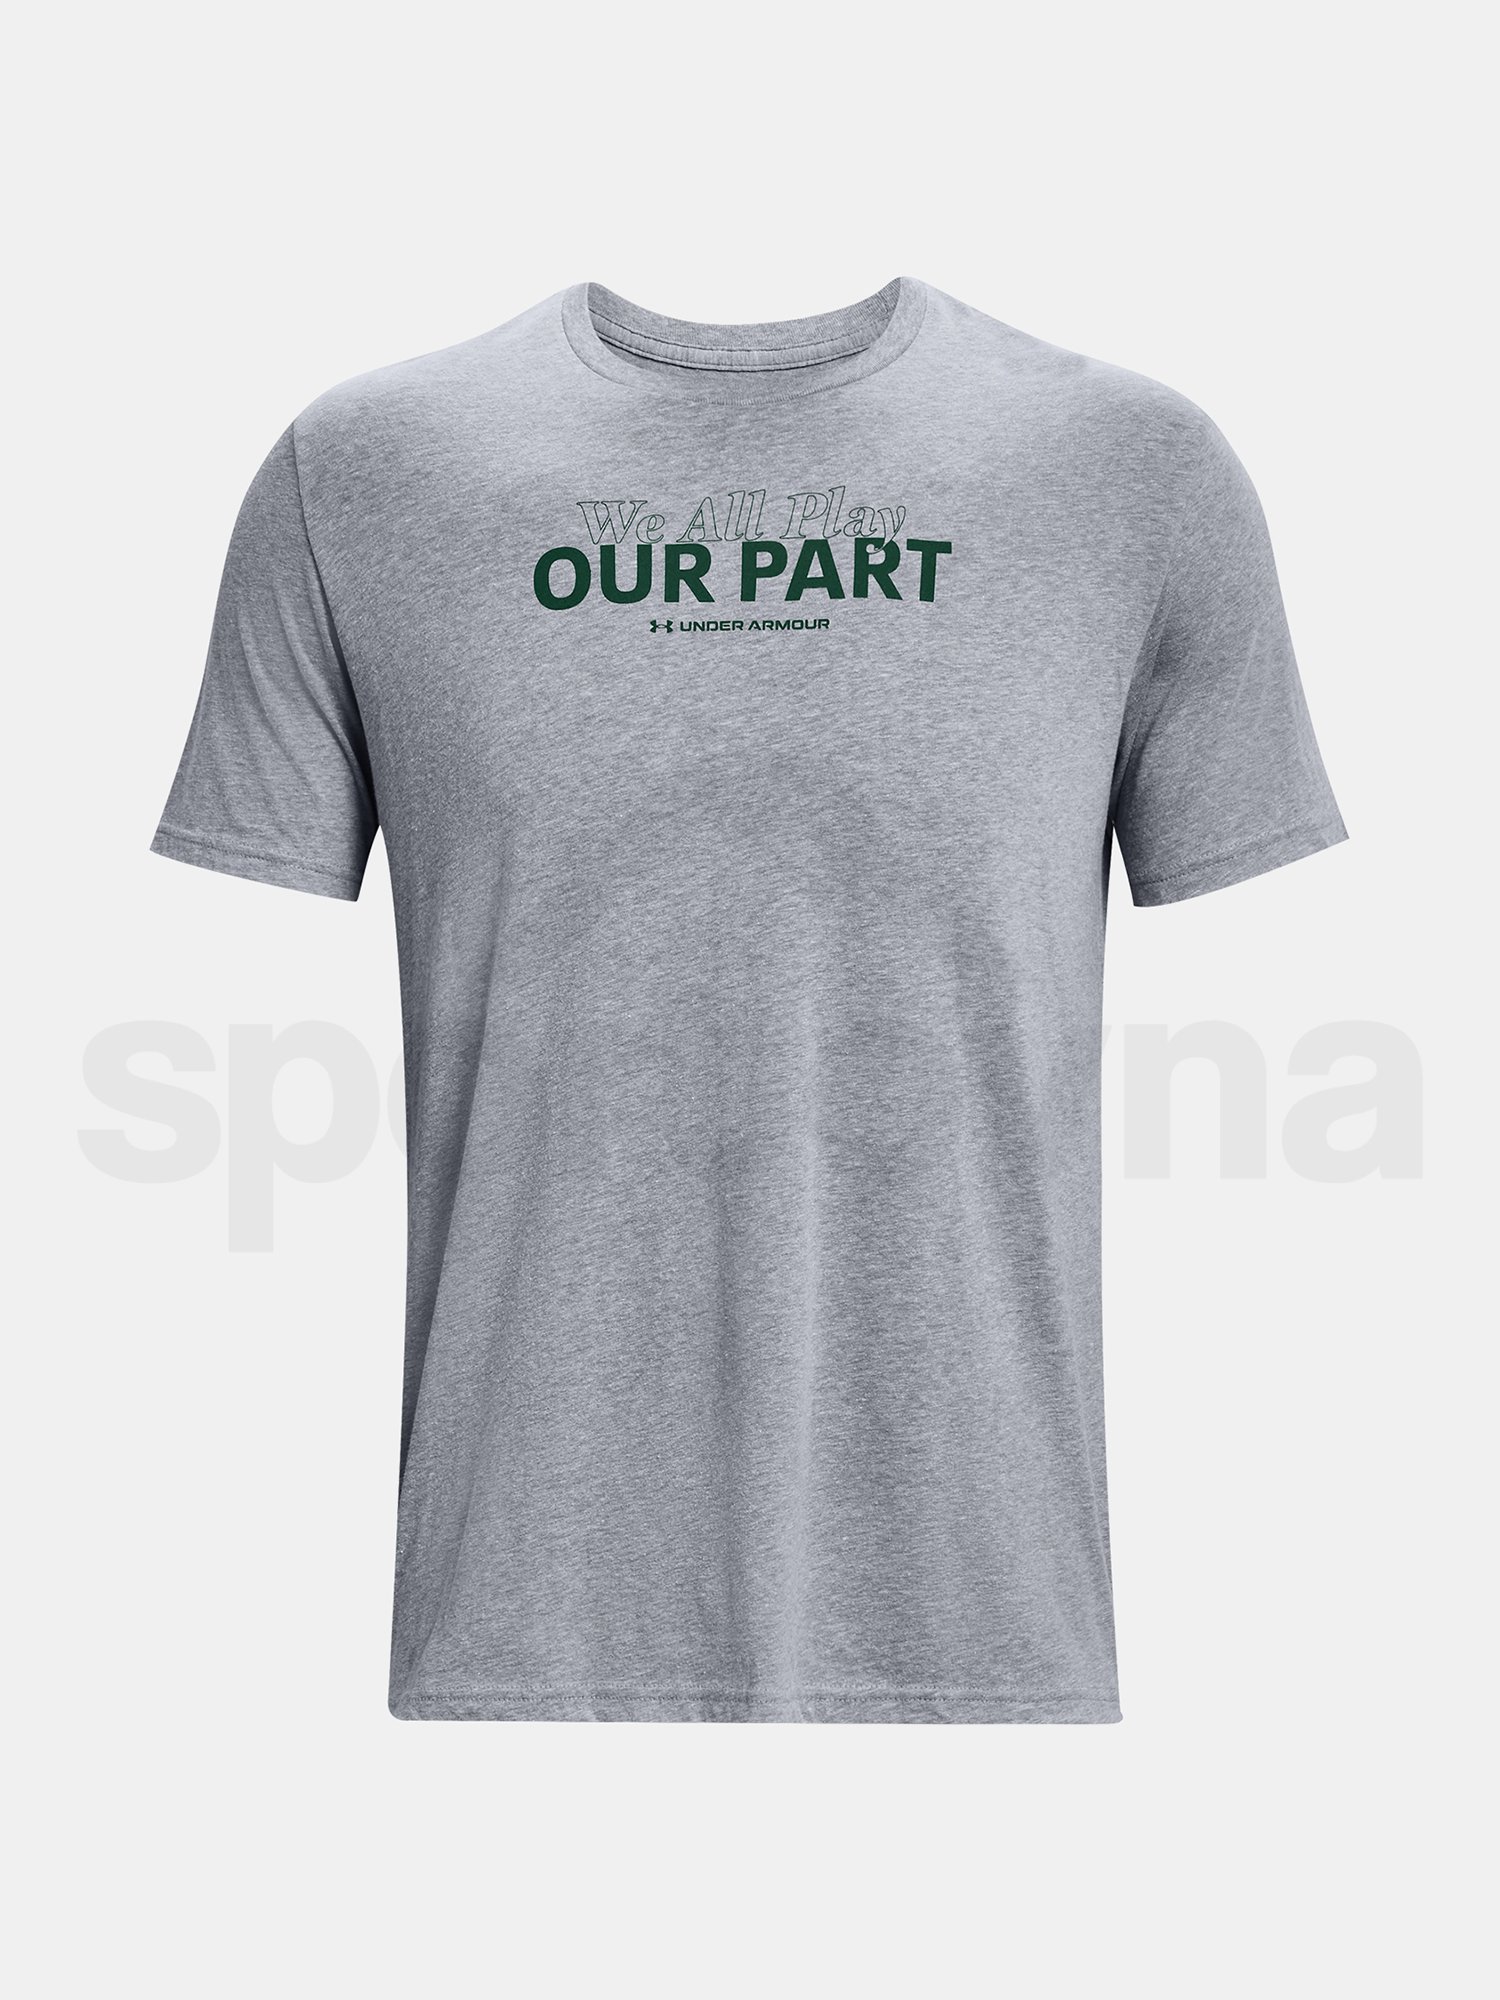 Tričko Under Armour UA WE ALL PLAY OUR PART SS-GRY